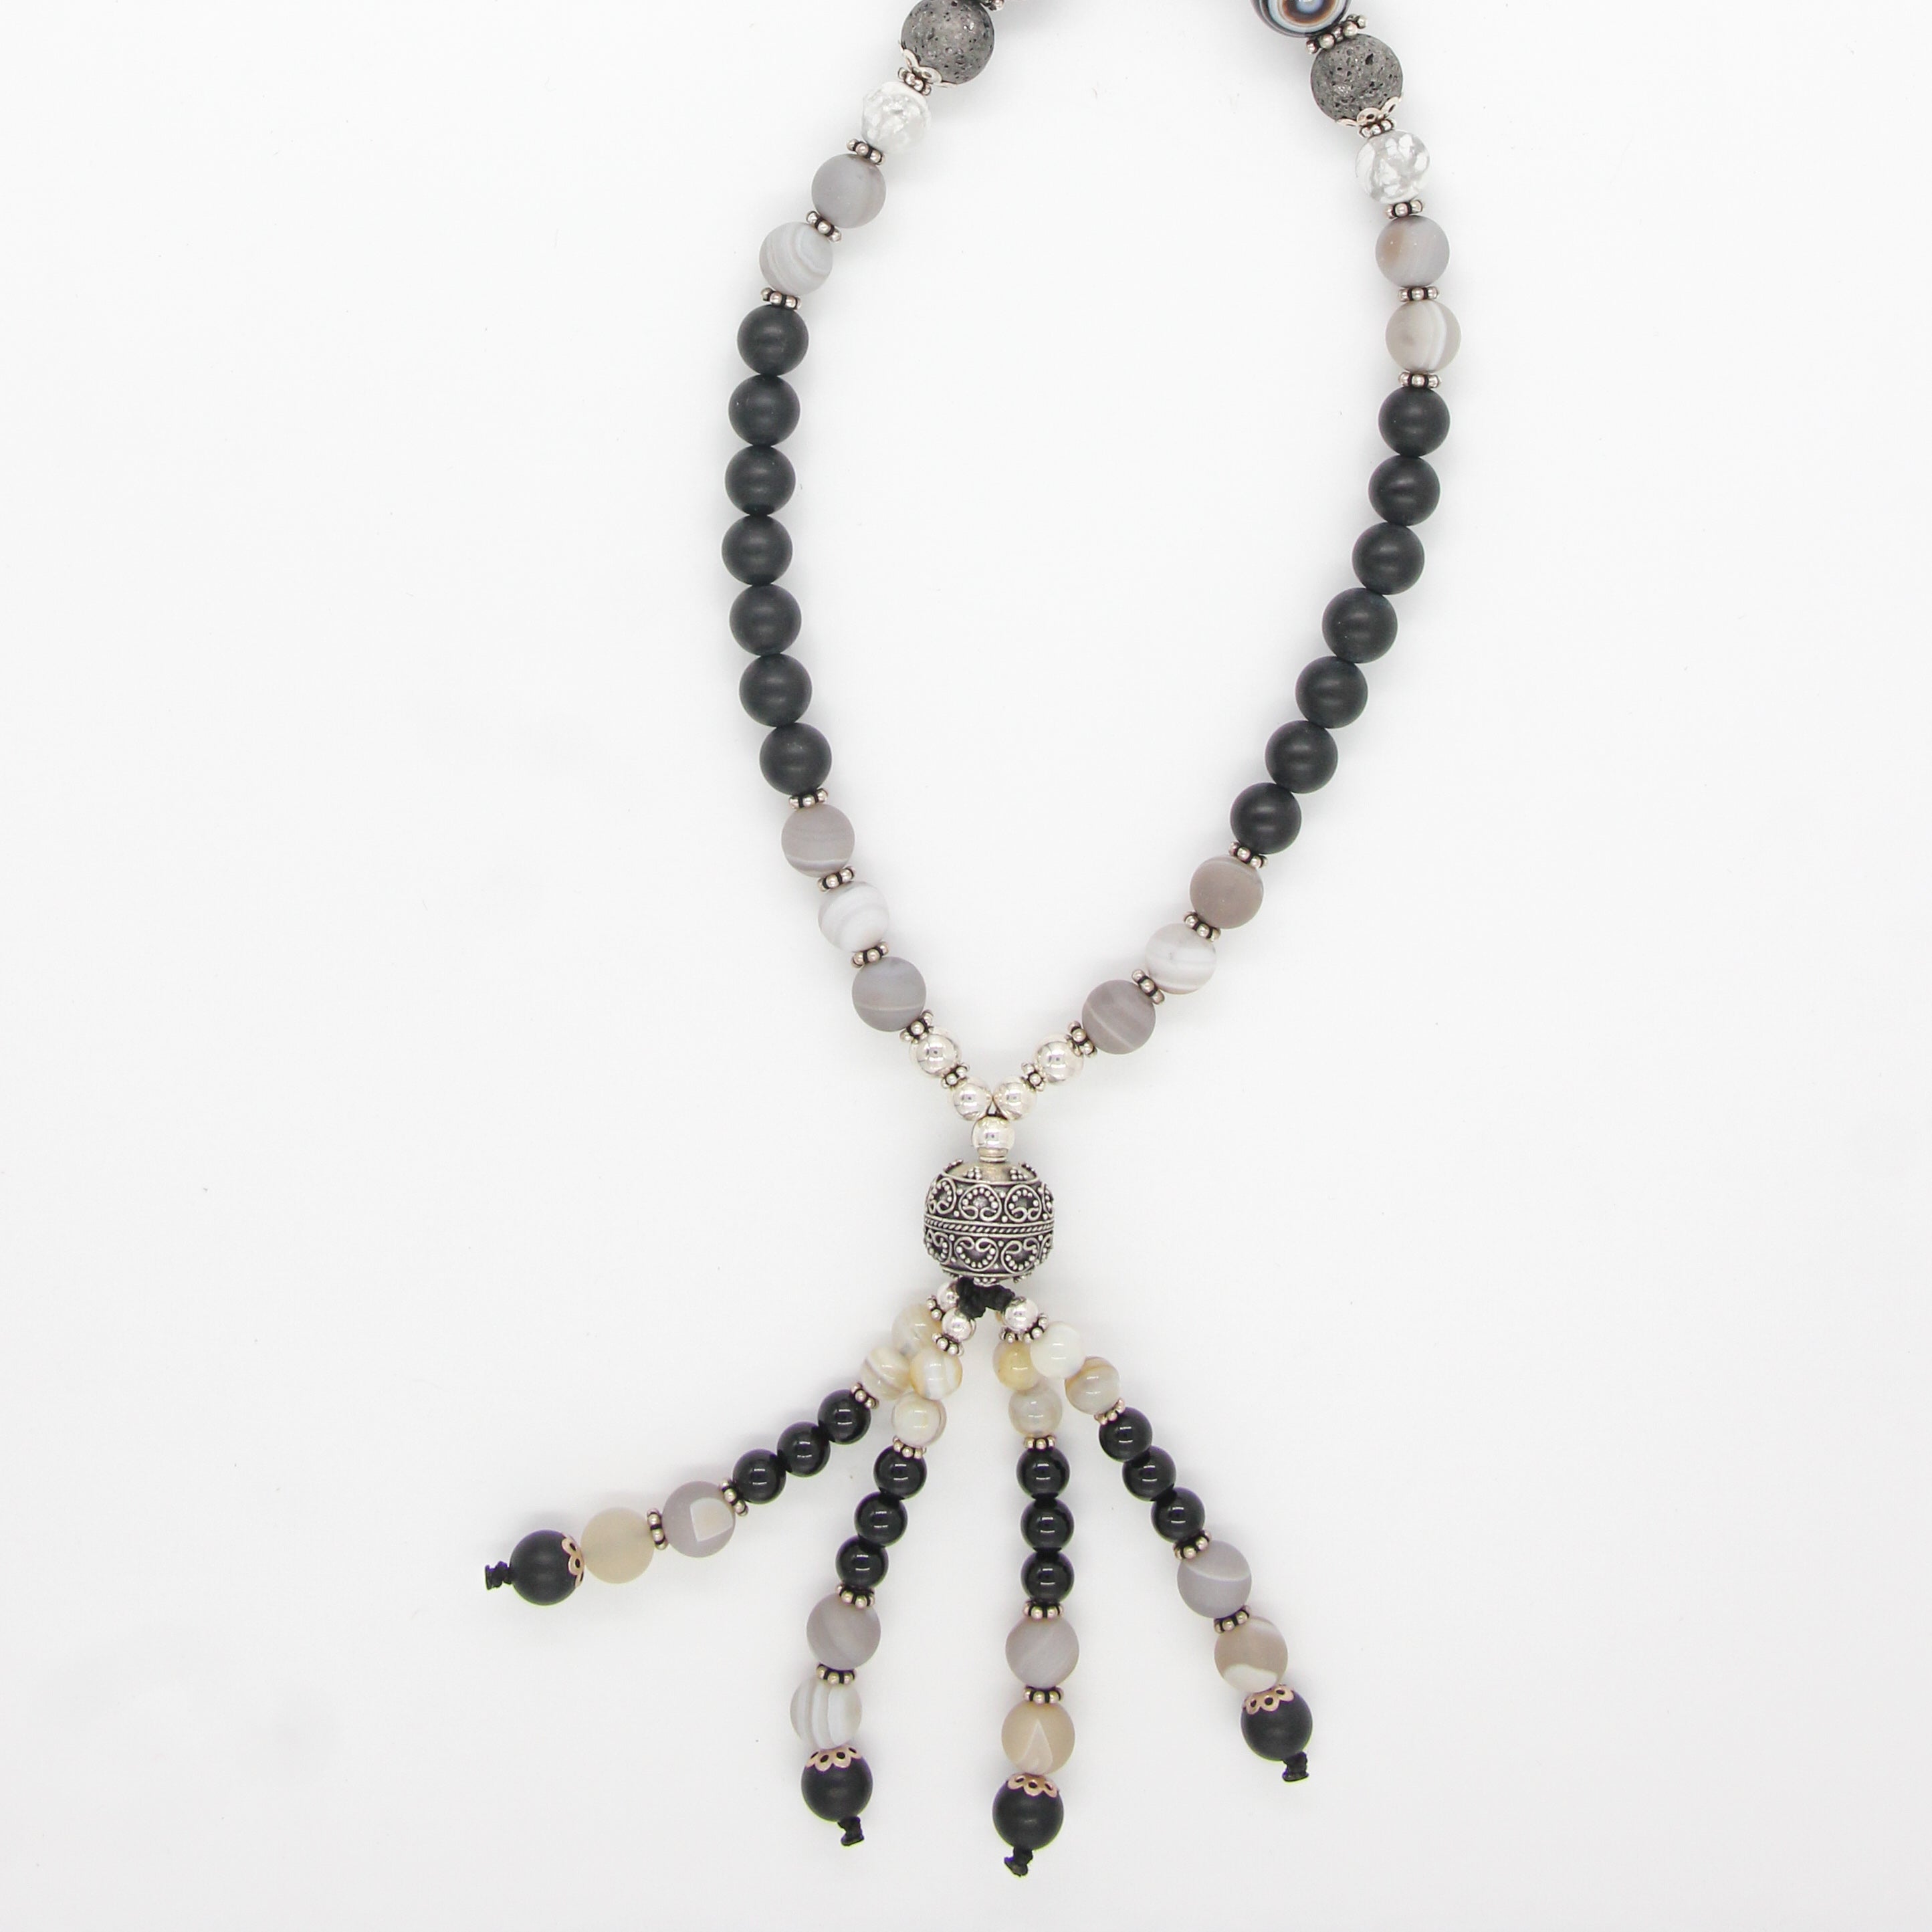 Black Onyx Beads Necklace with Agate, Lava, Howlite and Silver Beads